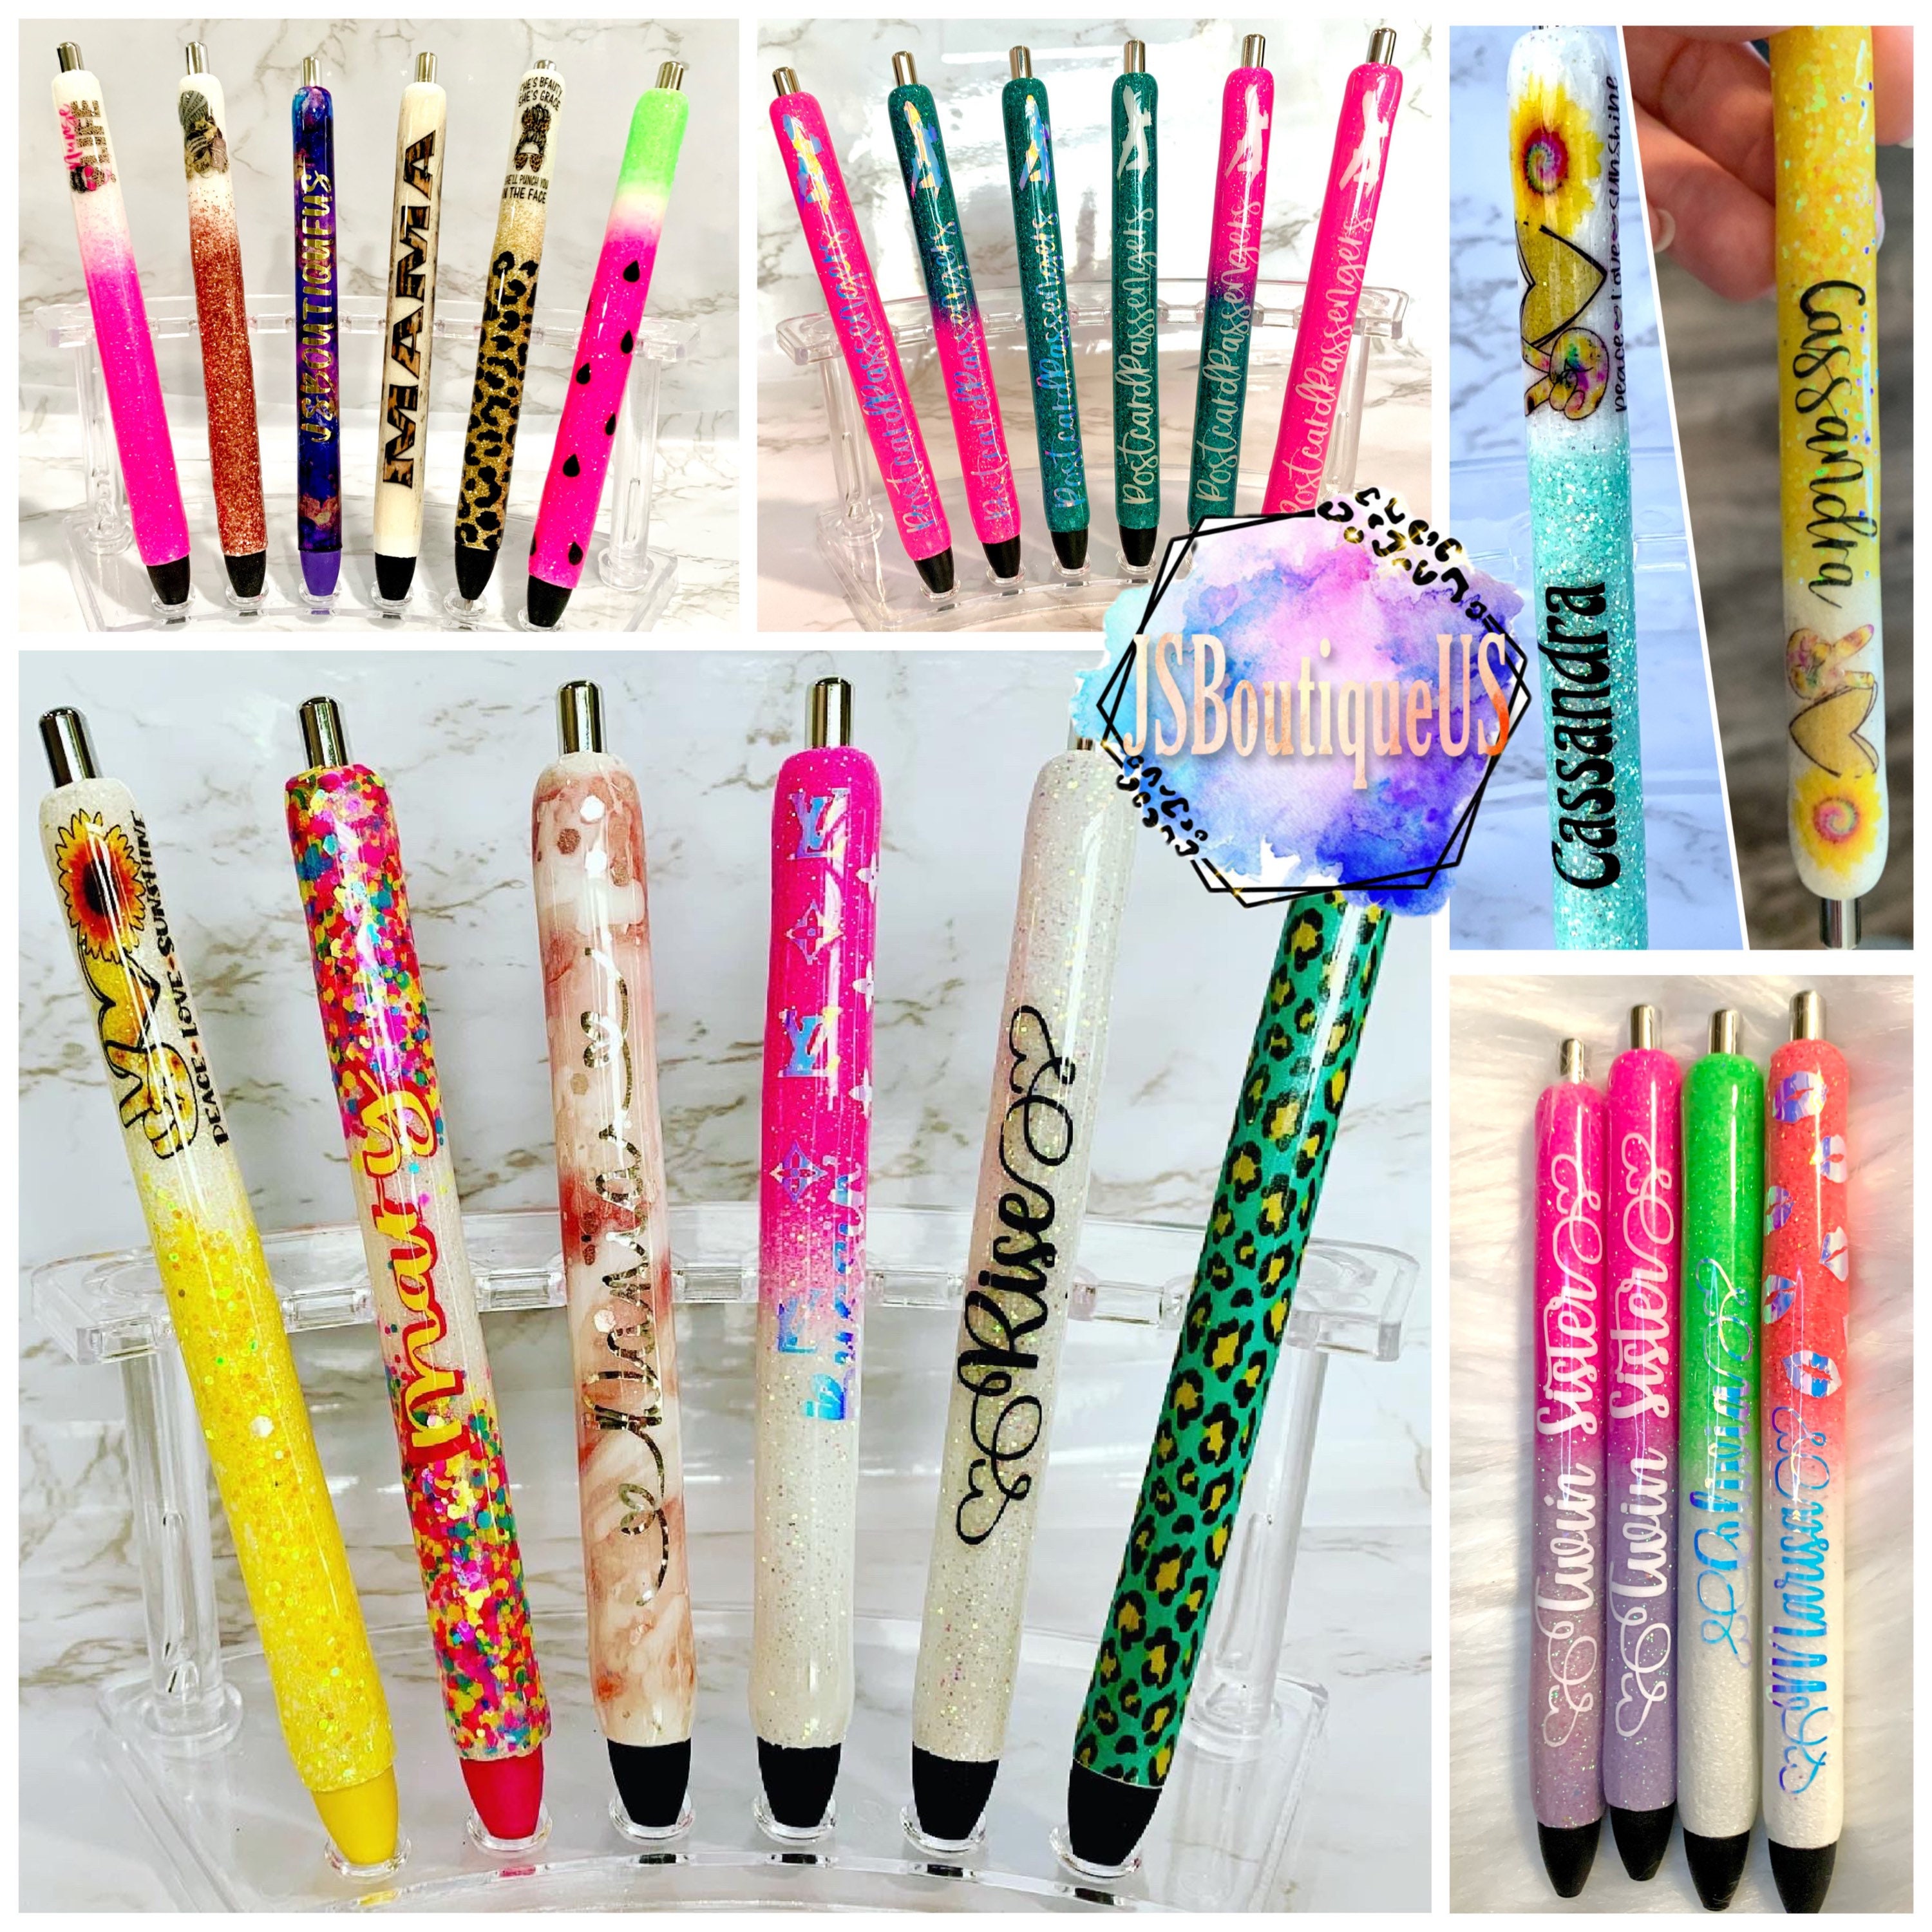 refillable Customized glitter pen Nightmare before christmas pens personalized ink joy